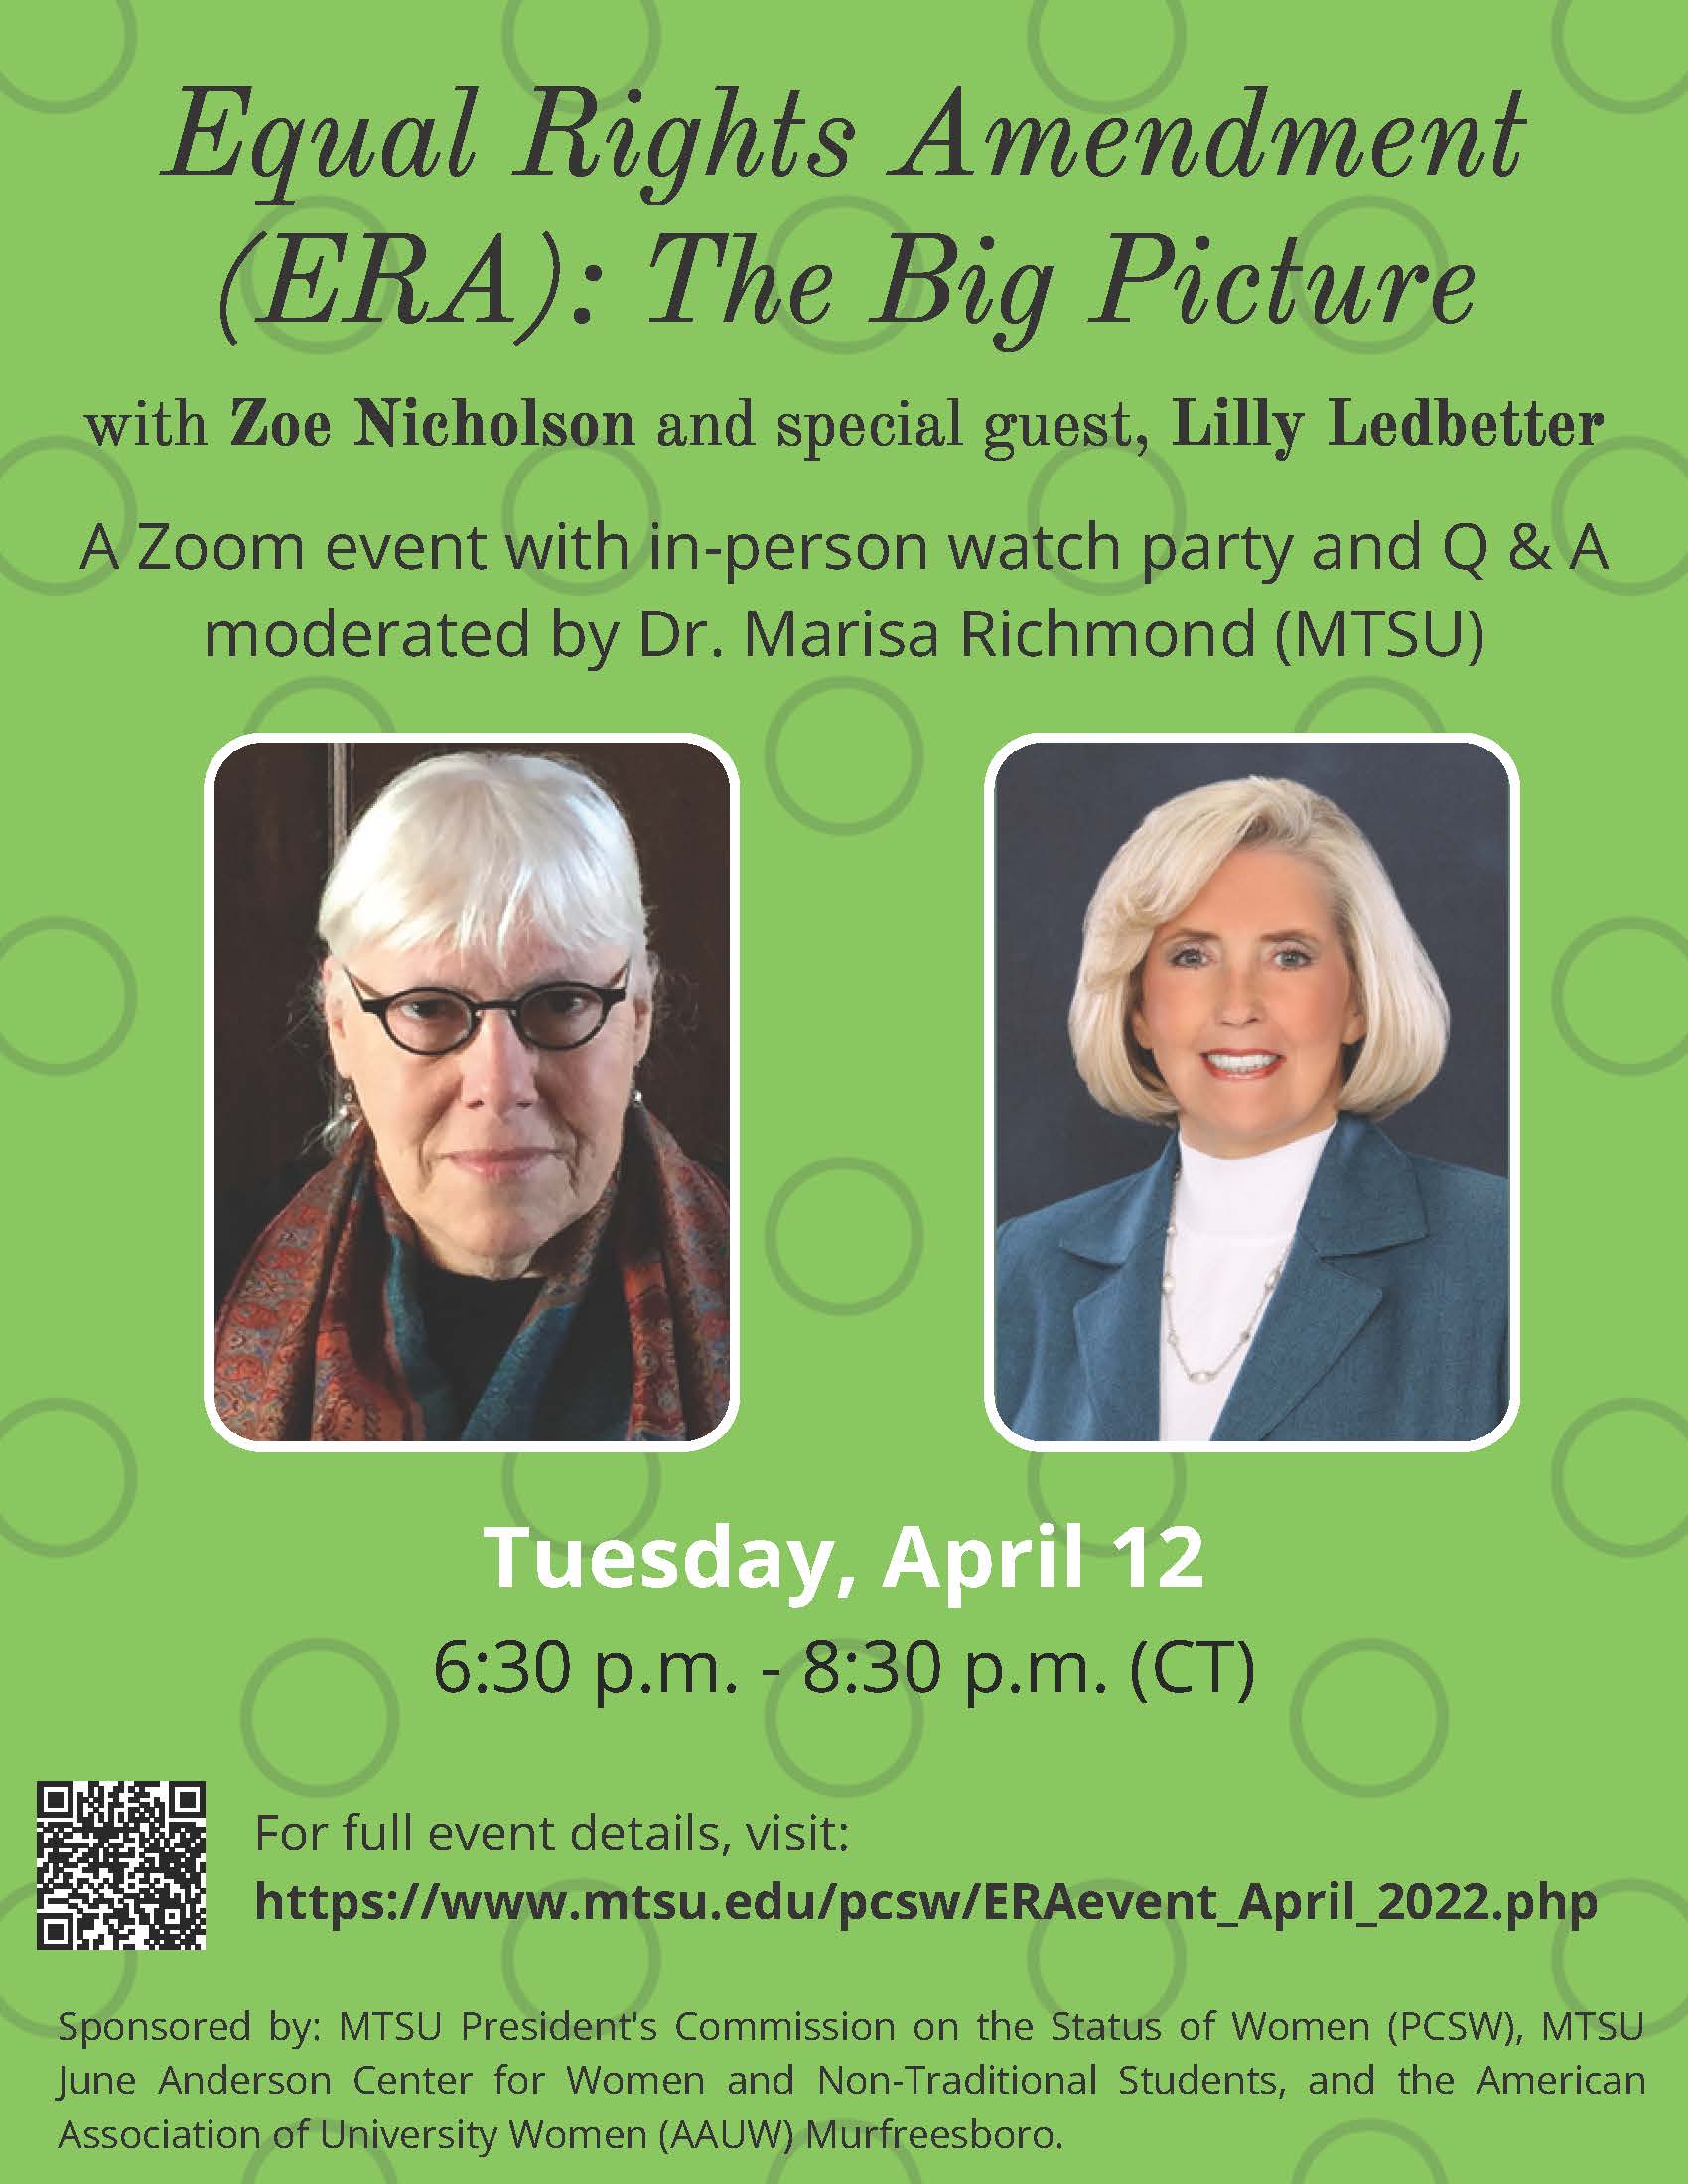 Event flyer for Equal Rights Amendment: The Big Picture. Event is April 12, 2022.